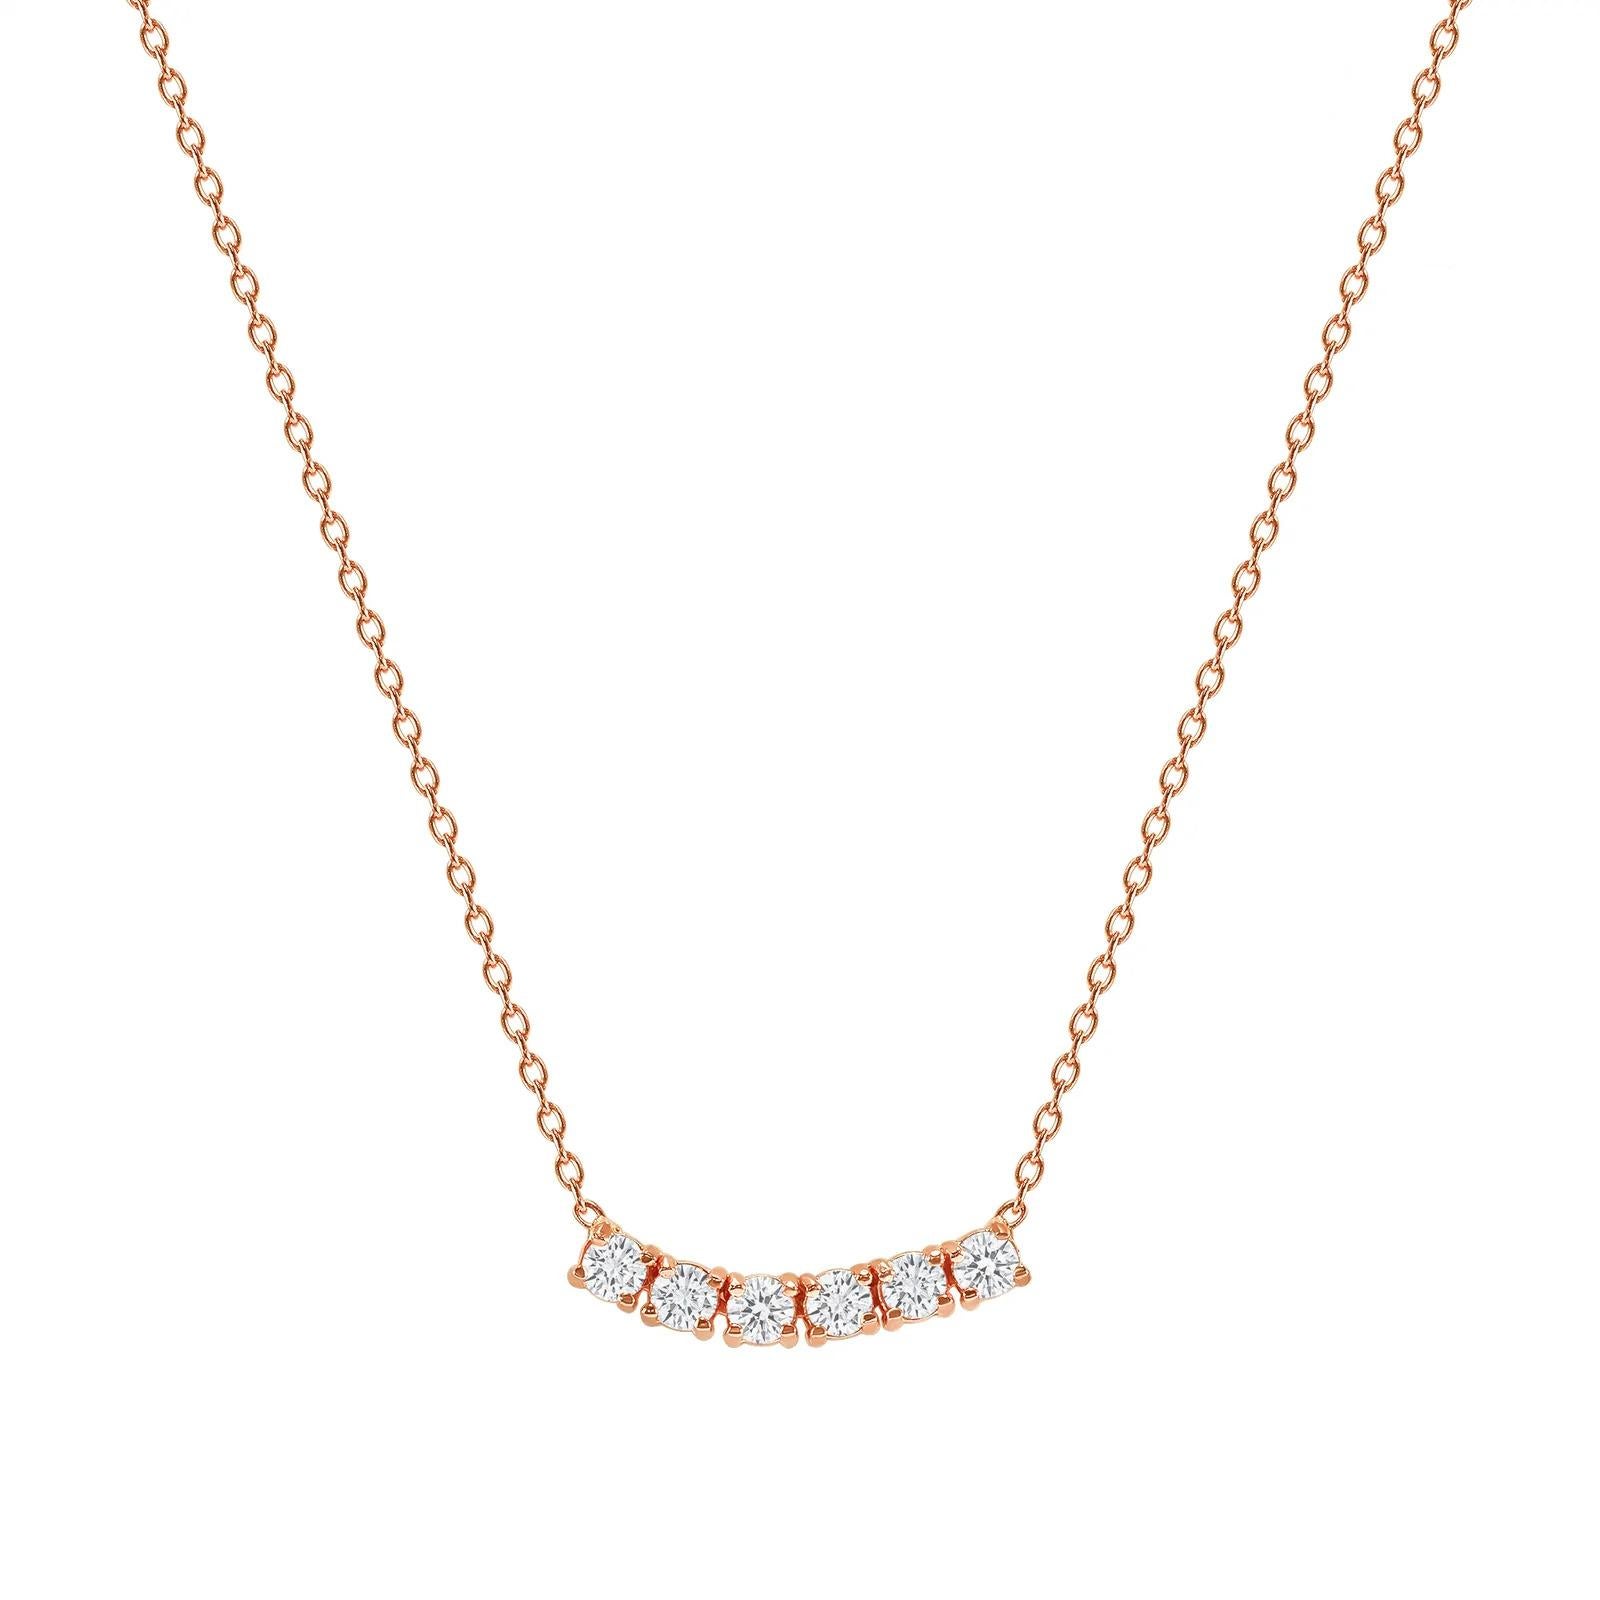 This petite, curved diamond necklace is crafted with gorgeous 14k gold set with six round diamonds.  

Gold: 14k 
Diamond Total Carats: 0.75 ct
Diamond Cut: Round (6 diamonds)
Diamond Clarity: VS
Diamond Color: F
Color: Rose Gold
Necklace Length: 18